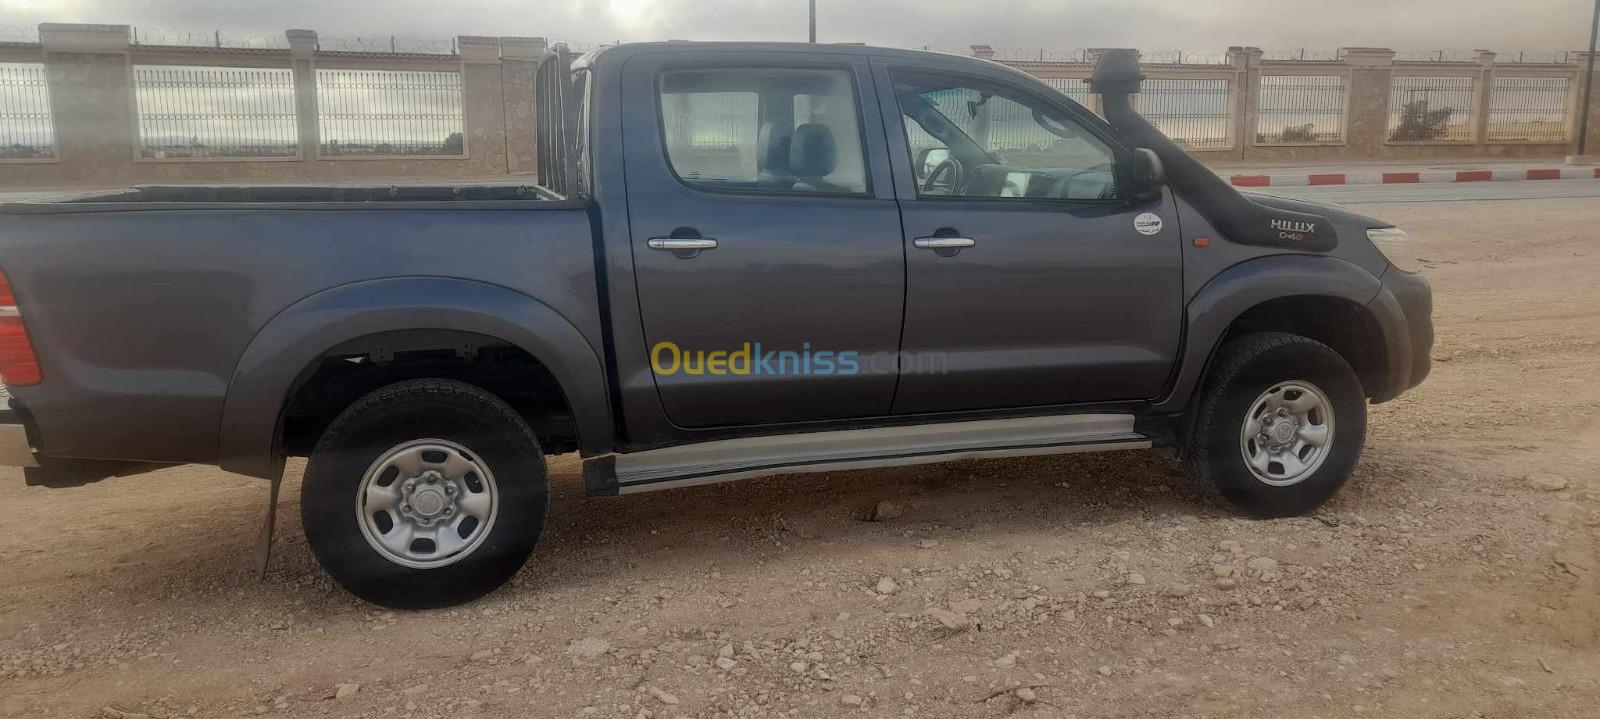 Toyota Hilux 2015 LEGEND DC 4x4 Pack Luxe